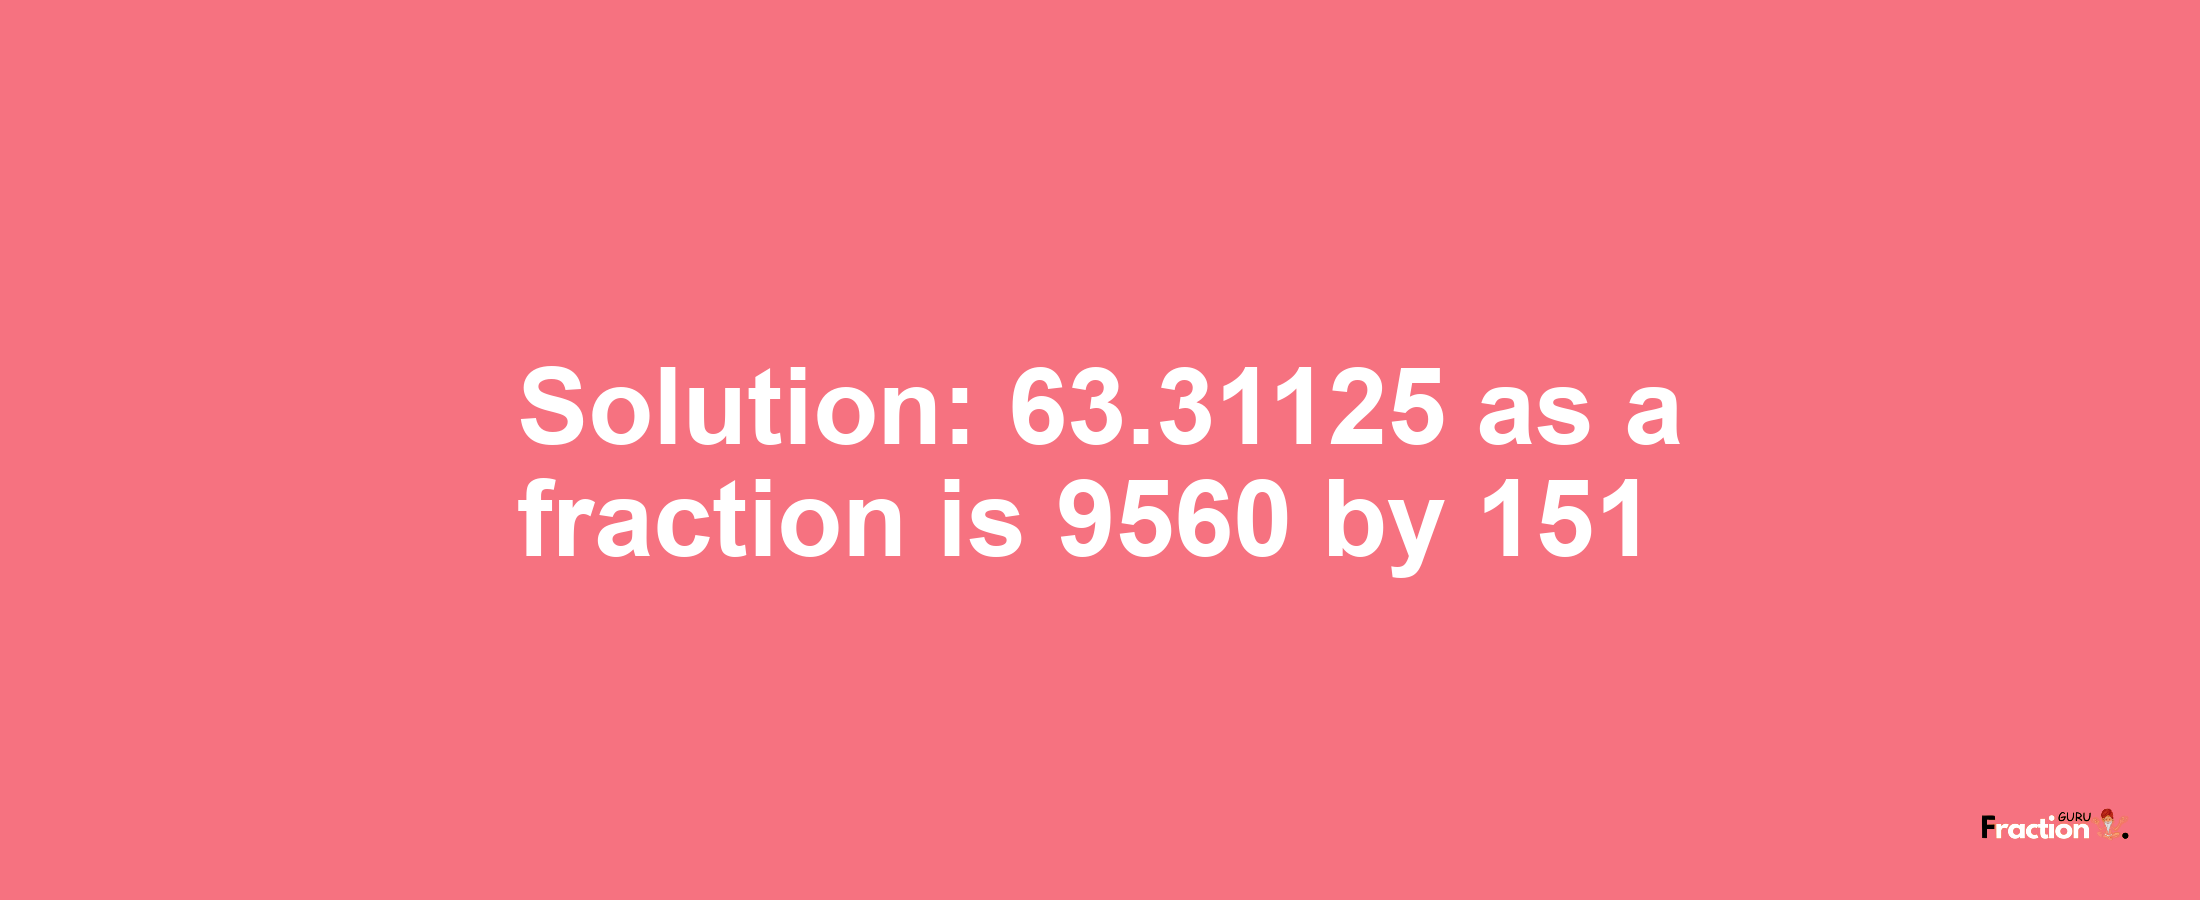 Solution:63.31125 as a fraction is 9560/151